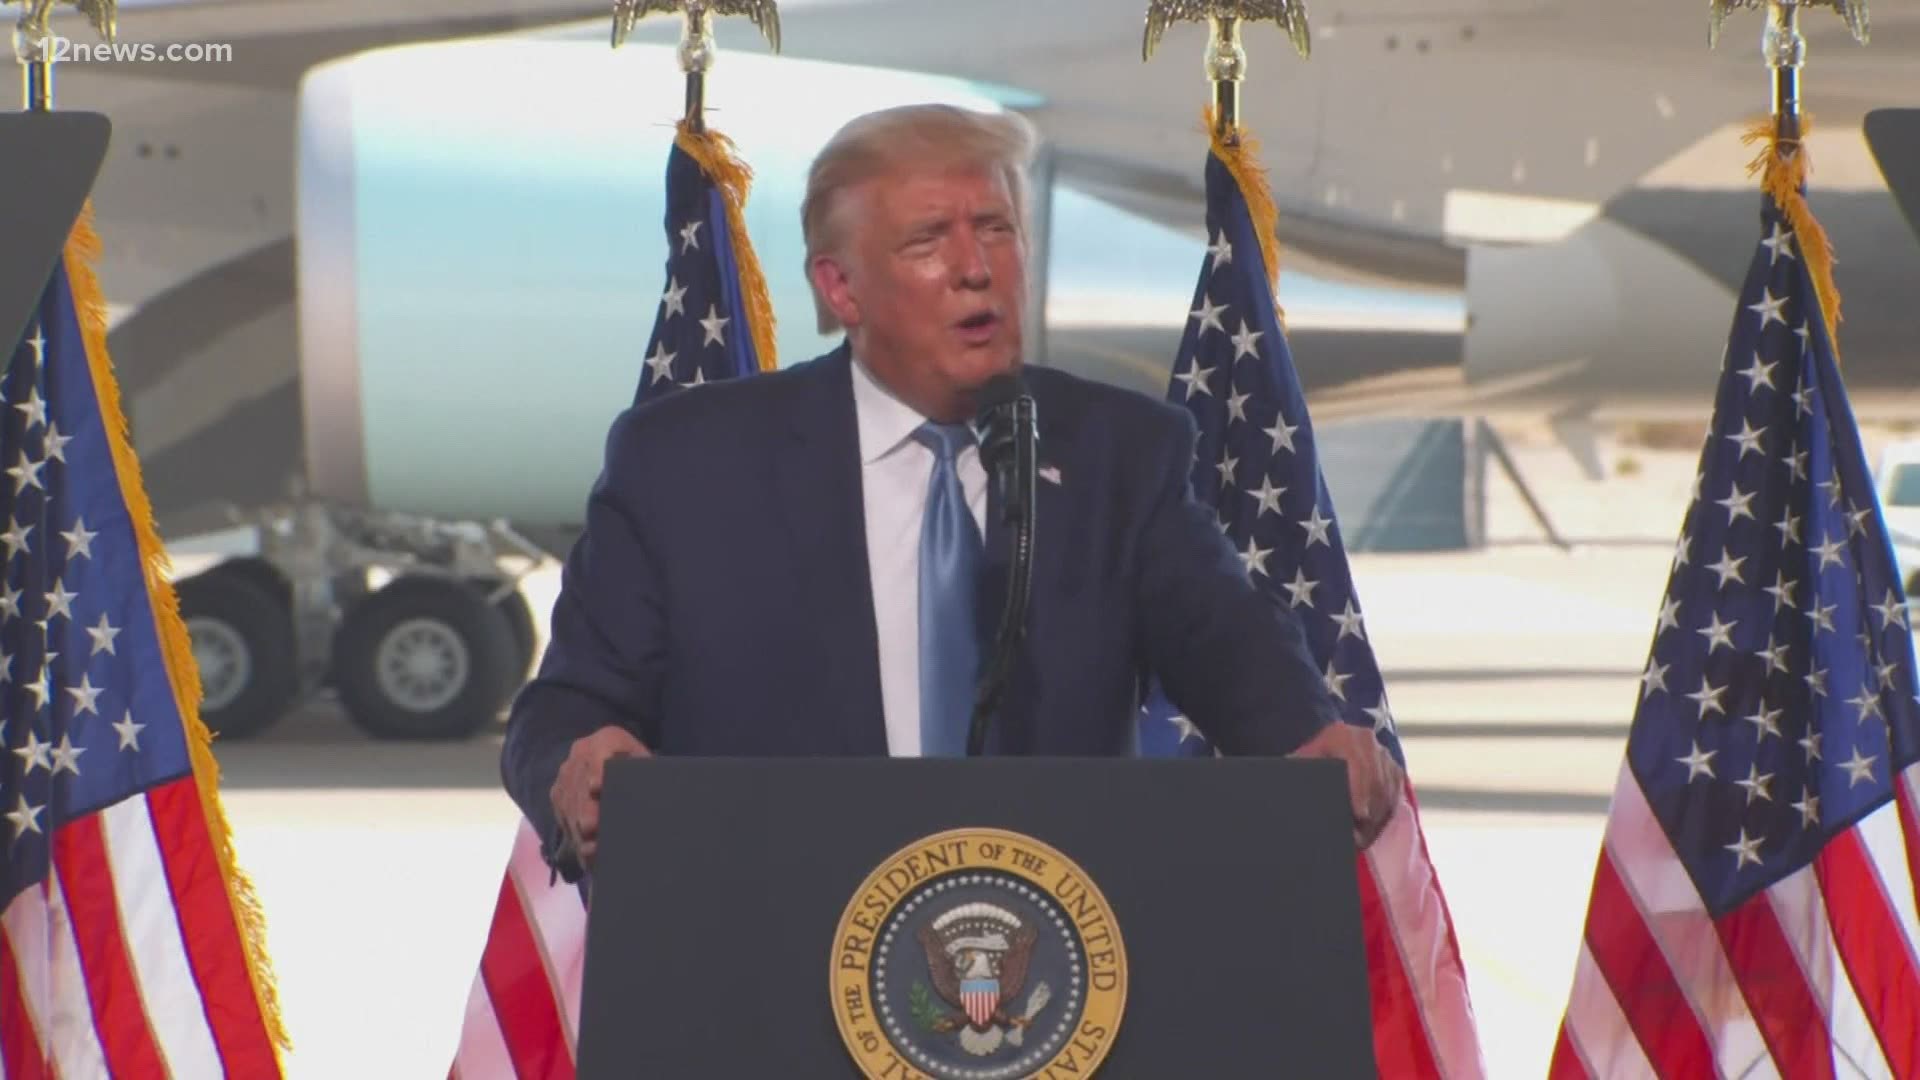 The president focused his speech in Yuma on immigration and border security, as well as continued attacks against Democratic rival Joe Biden.